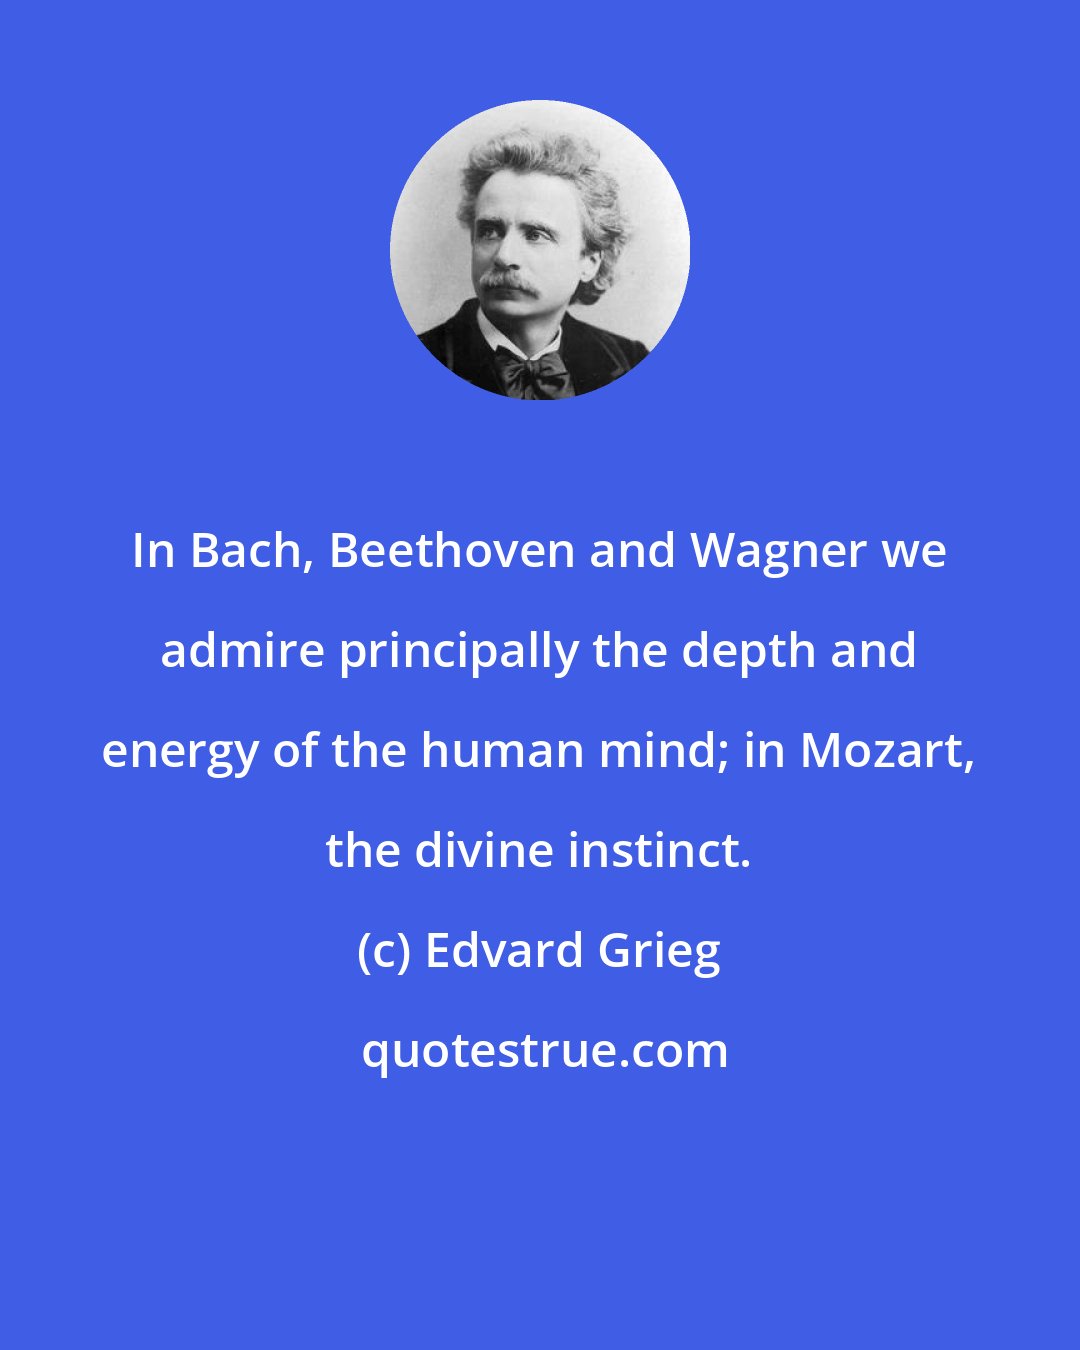 Edvard Grieg: In Bach, Beethoven and Wagner we admire principally the depth and energy of the human mind; in Mozart, the divine instinct.